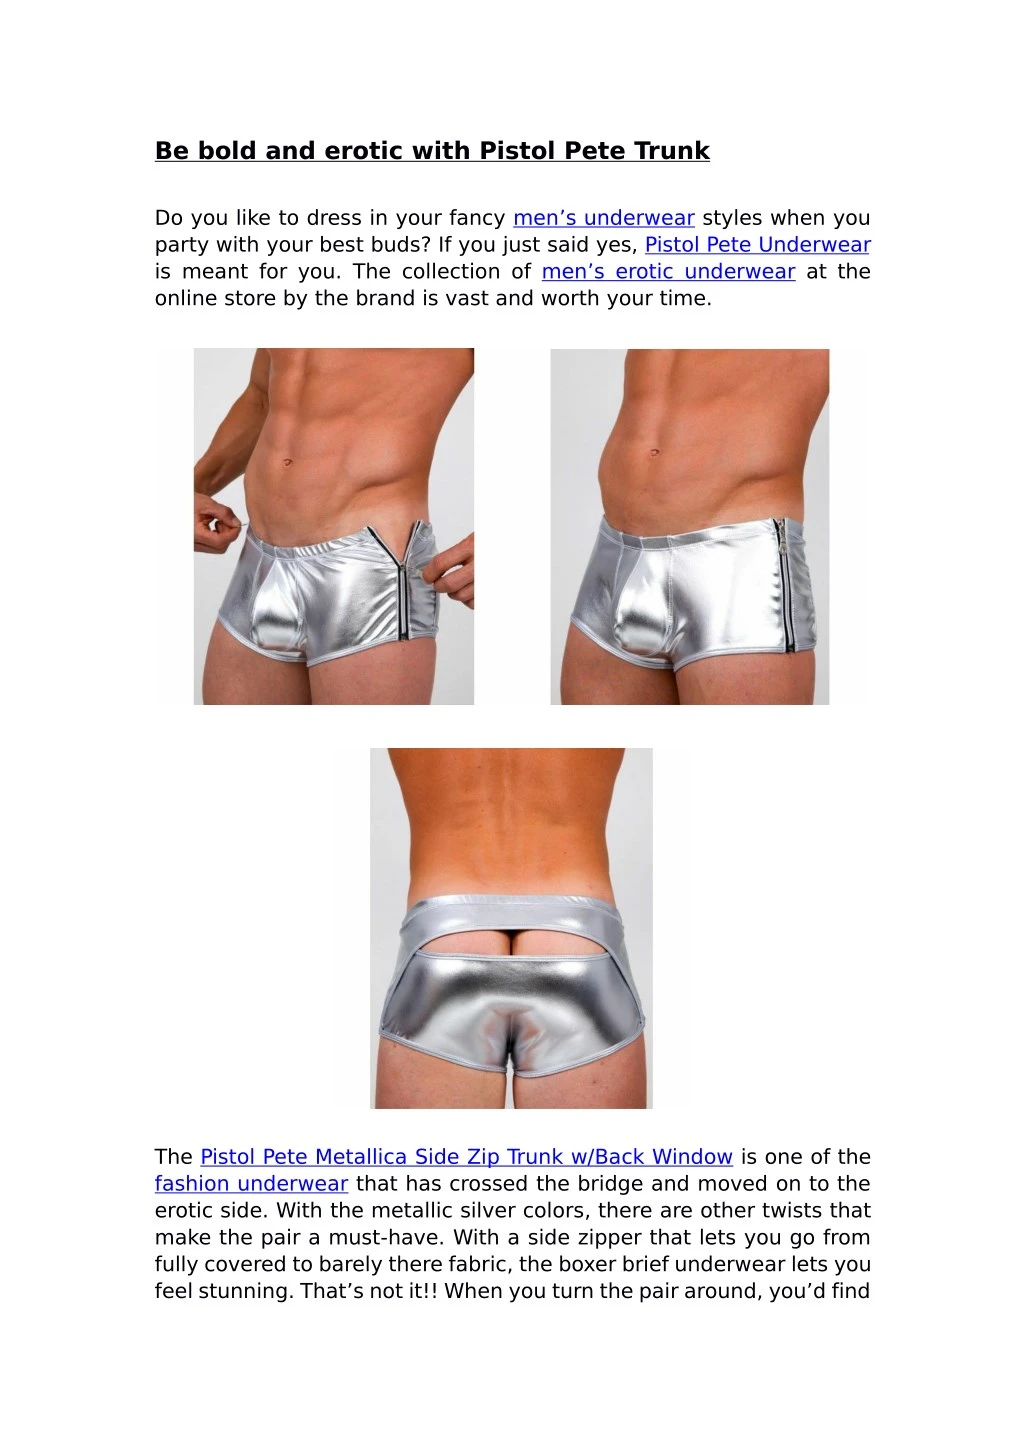 be bold and erotic with pistol pete trunk